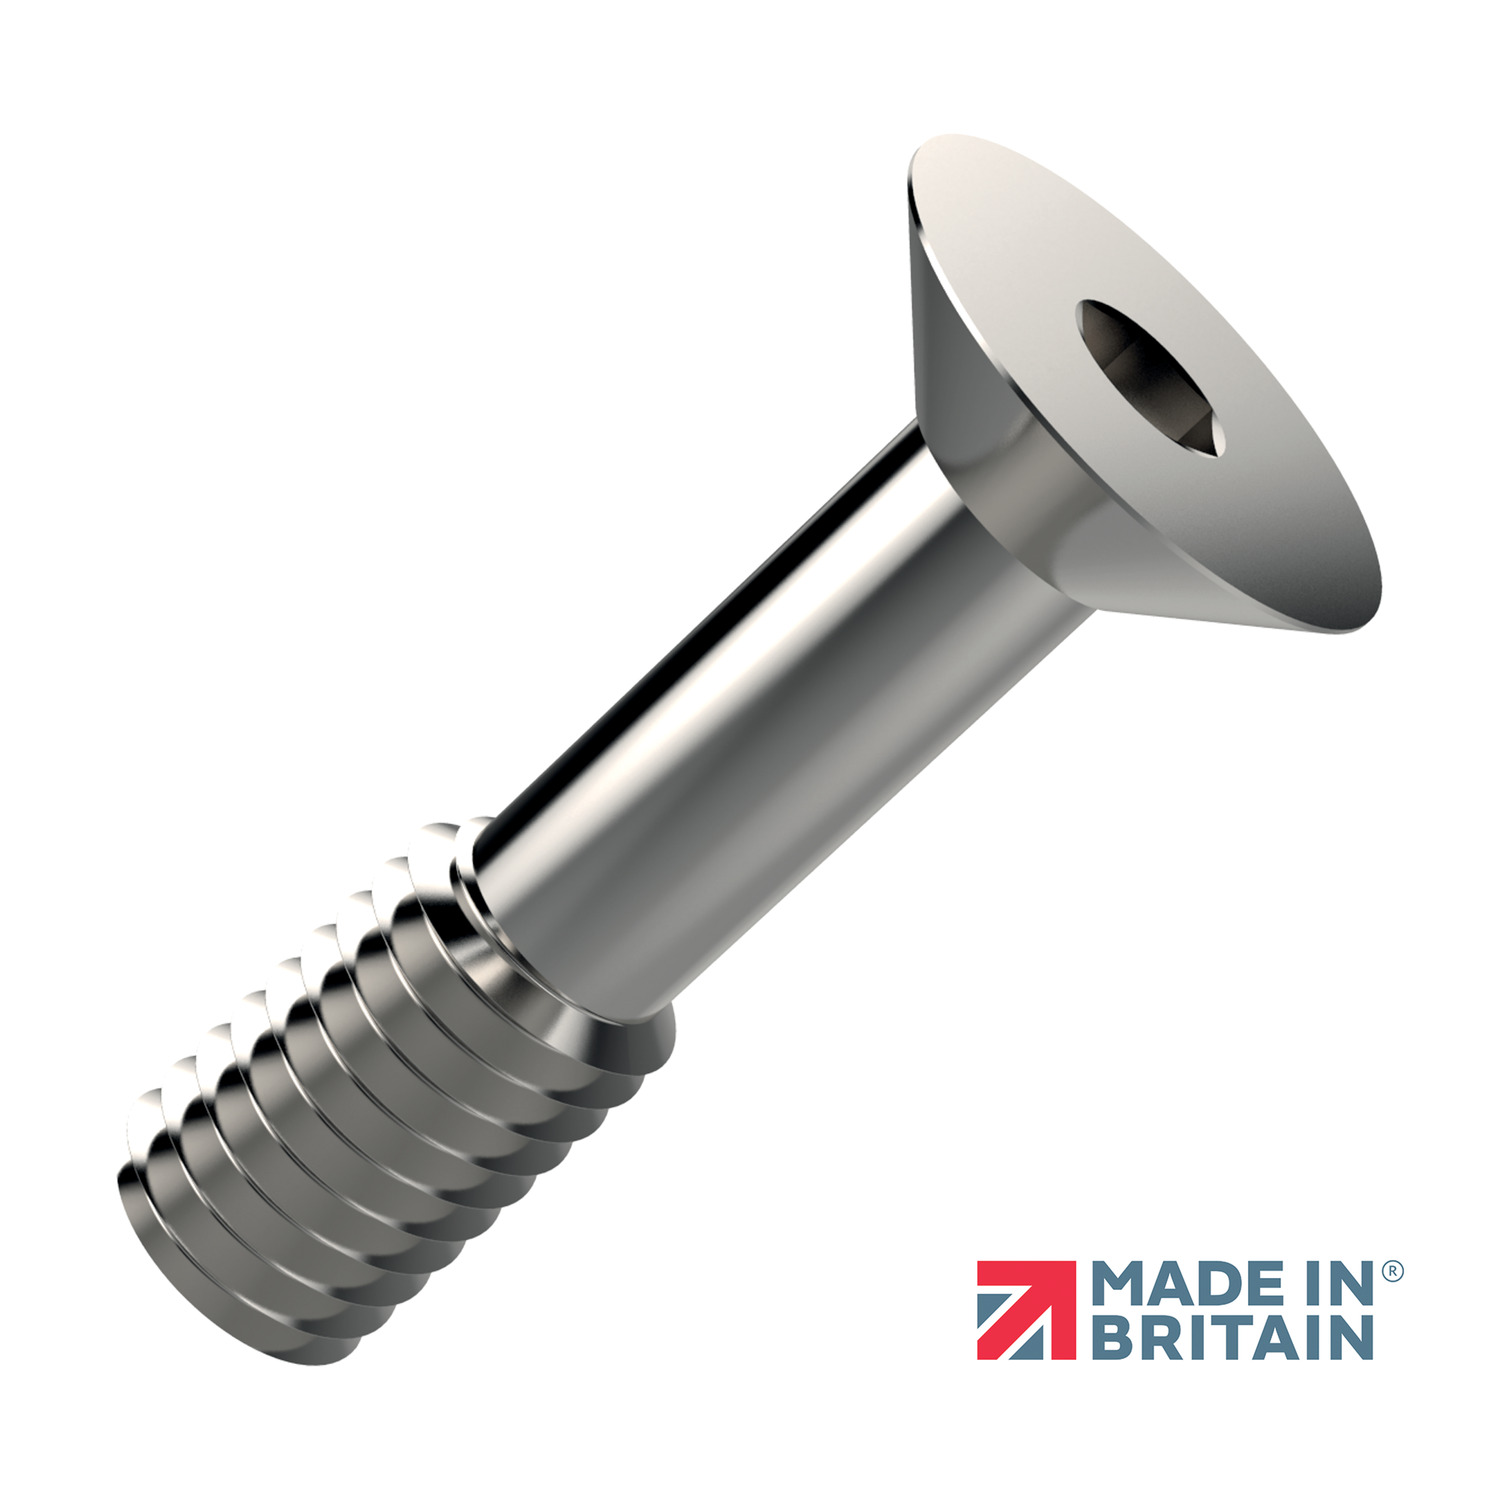 Captive Screws - Countersunk Stainless steel A2. Countersunk screws are manufactured to DIN 7991